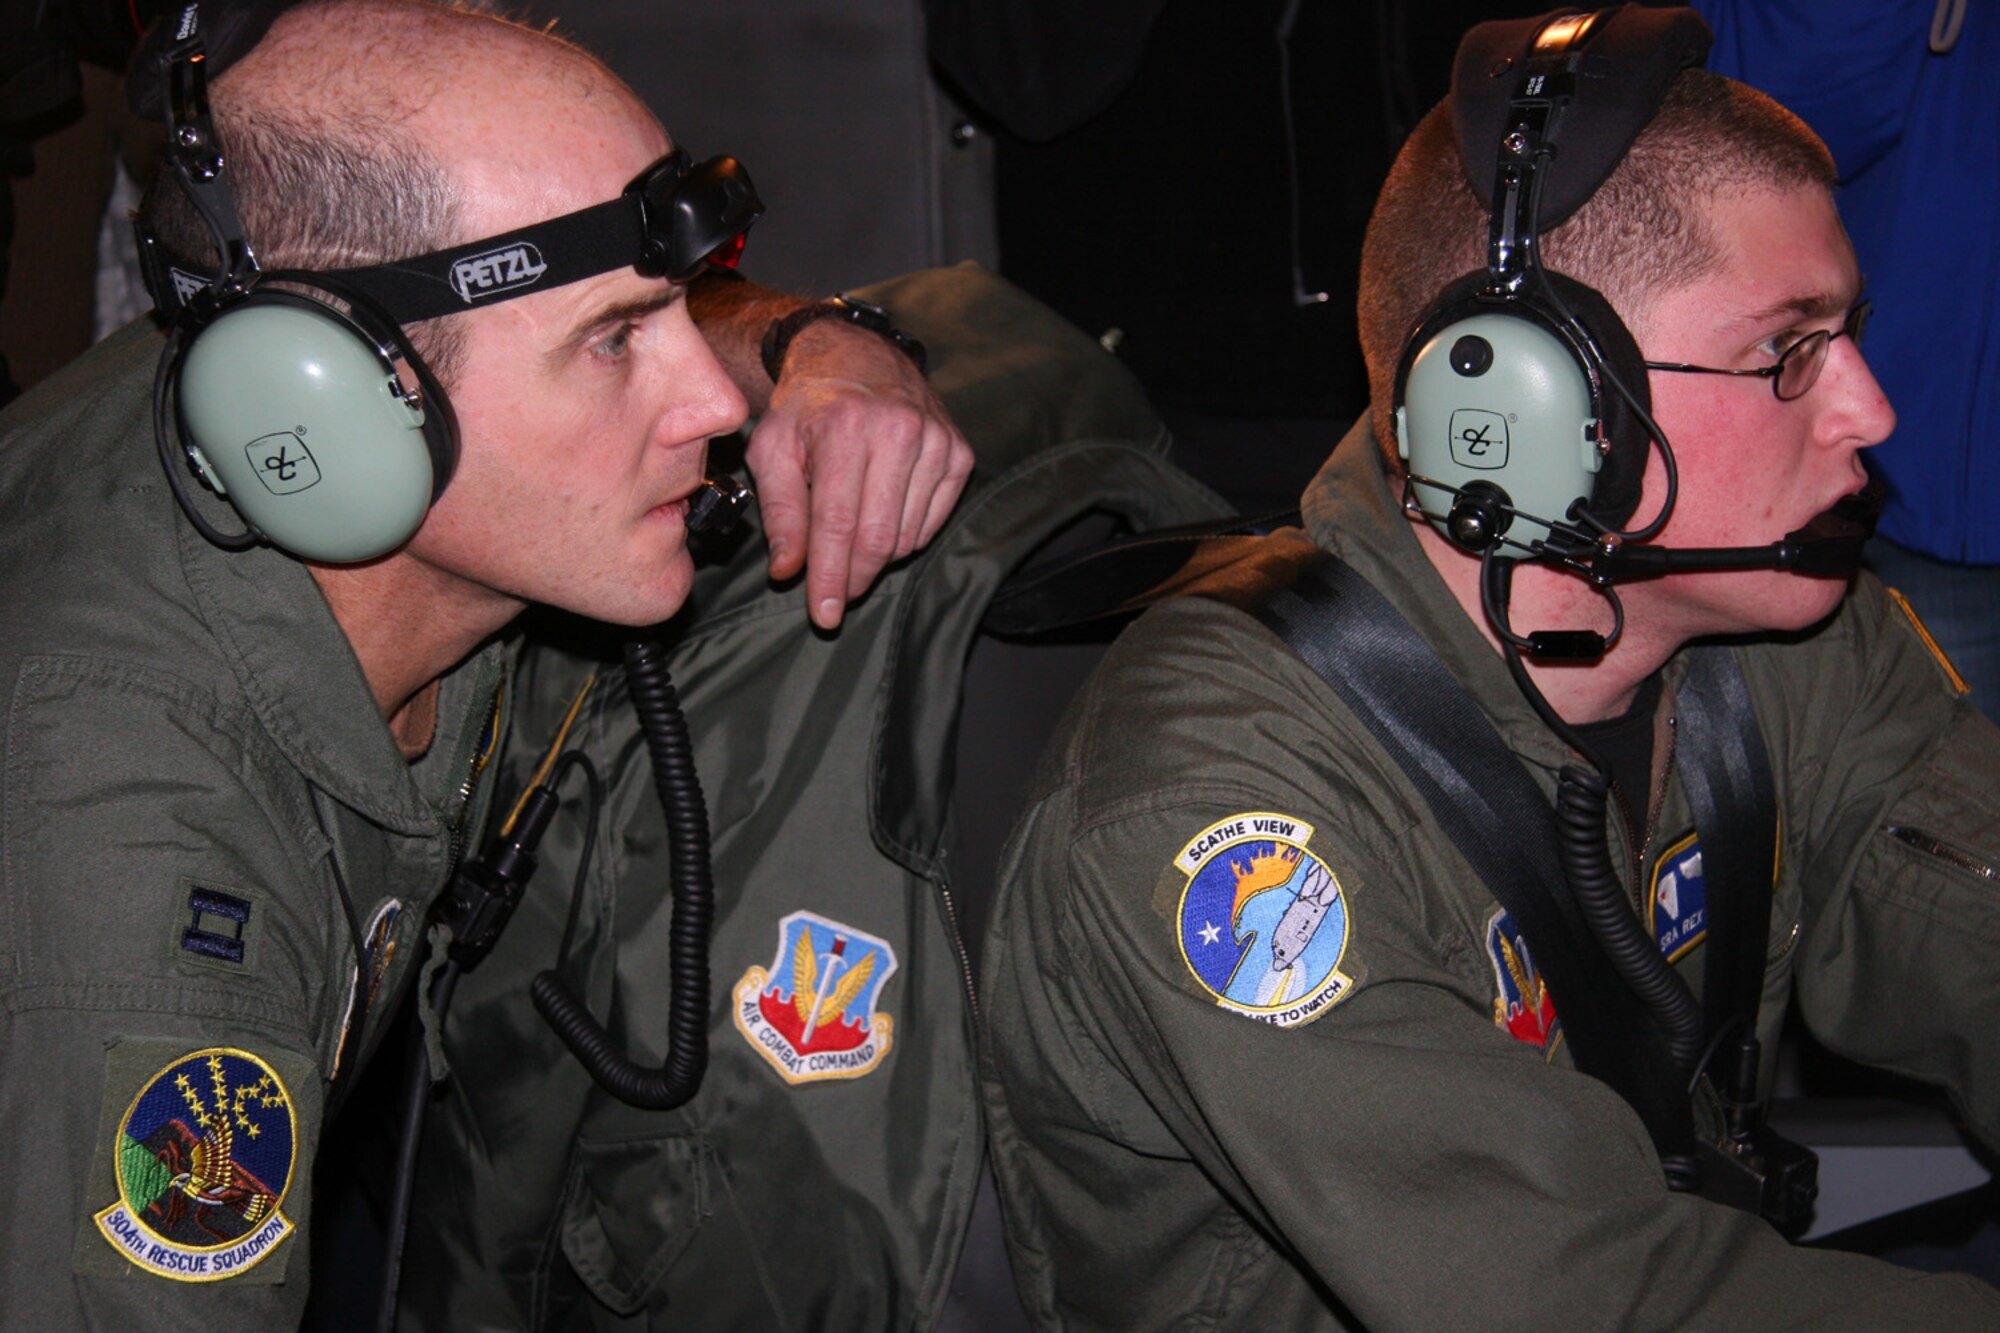 Capt. Ross Willson (left) directs an image analyst to specific coordinates while flying in a C-130H over Mt. Hood, Ore., Dec. 16. Captain Willson, a combat rescue officer from the 304th Rescue Squadron in Oregon, worked with members of the 152nd Airlift Wing from Nevada while aboard the cargo plane equipped with thermal imaging to search for three climbers who left Dec. 7 on what was to be a two-day trip climbing Mt. Hood. The 304th RQS also has two teams of pararescue specialists on the ground battling winds that reached up to 50 mph in an attempt to bring the stranded climbers off the mountain. (U.S. Air Force photo/Maj. James R. Wilson)